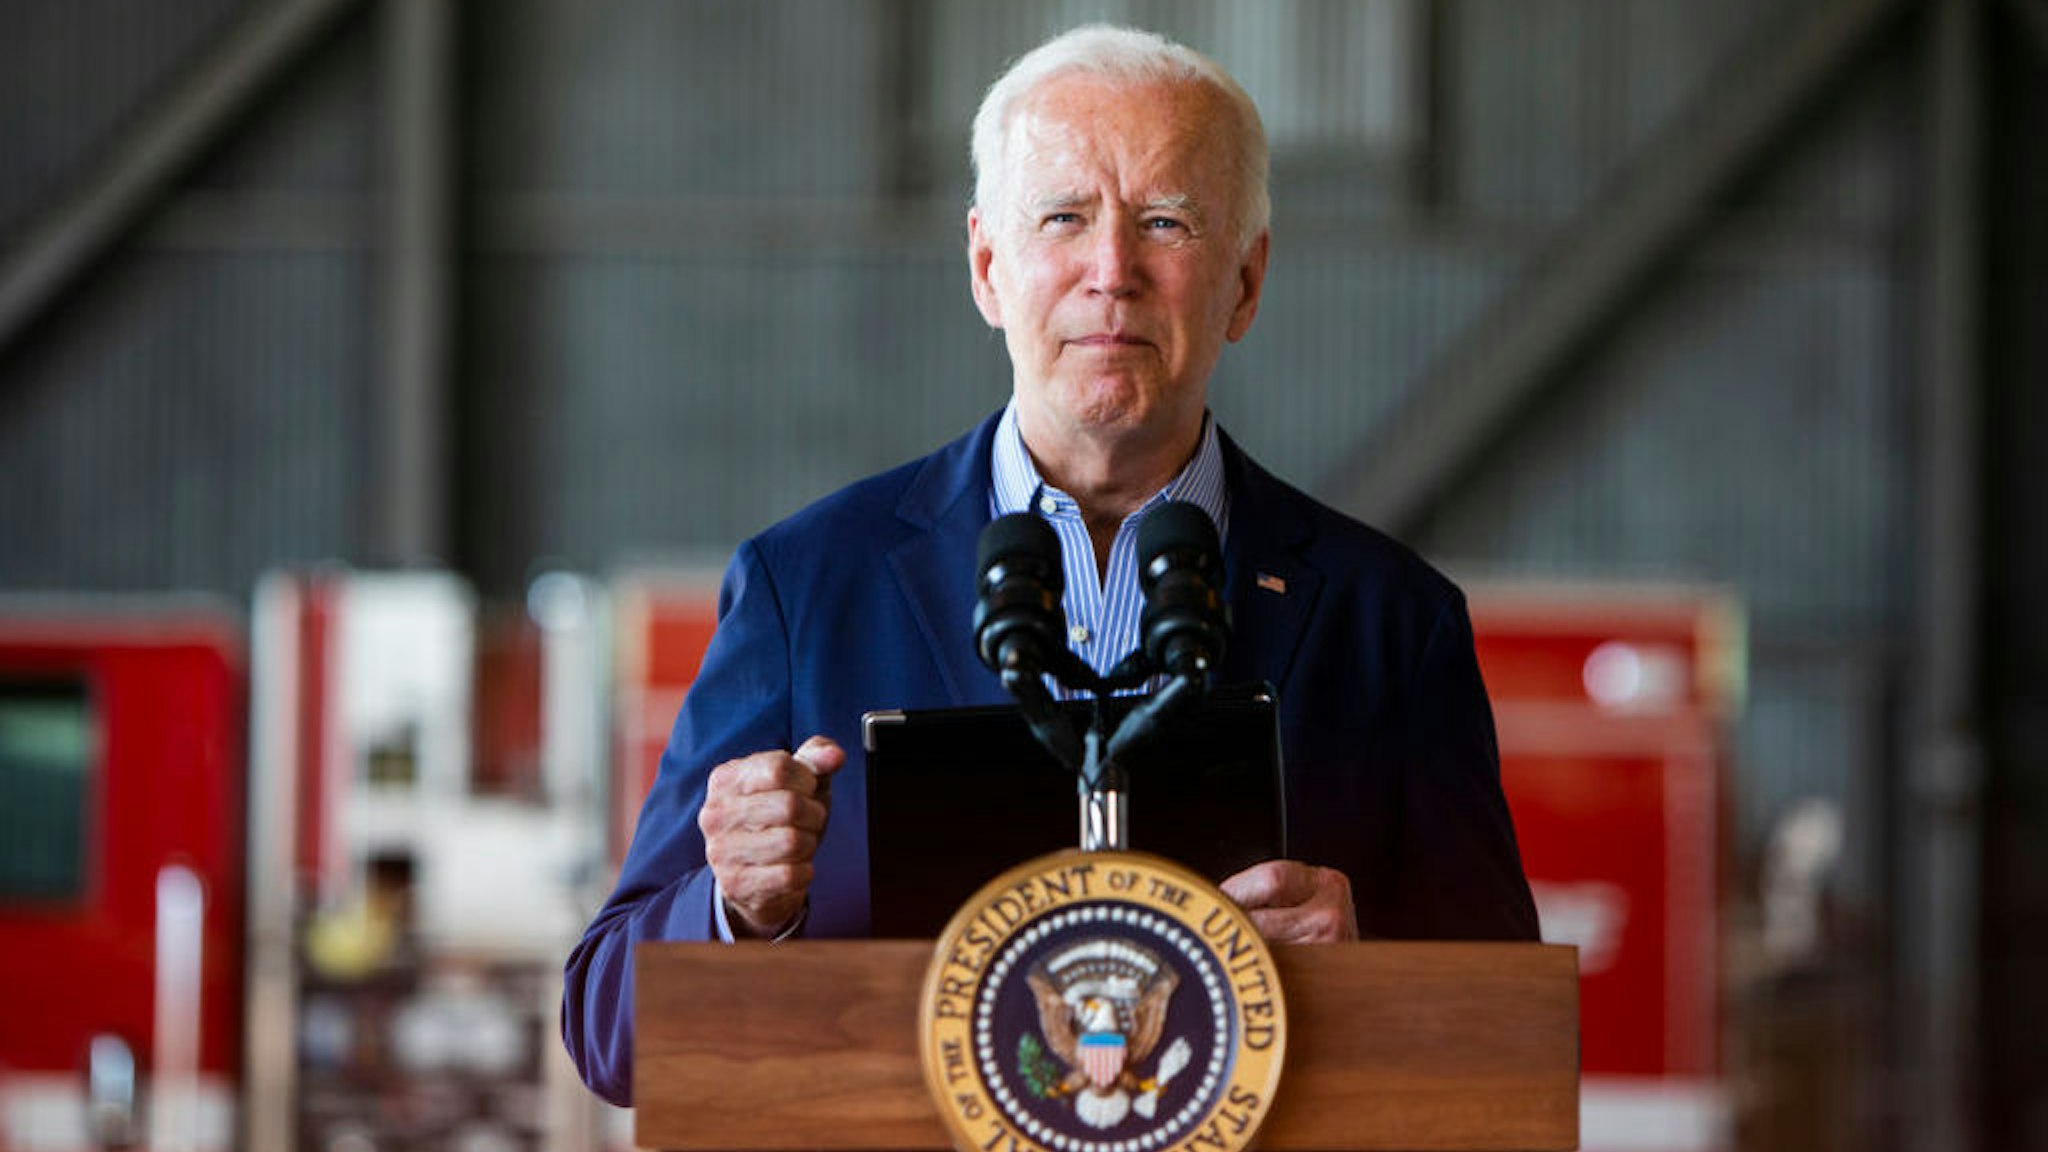 SACRAMENTO, CA - SEPTEMBER 13: President Joe Biden speaks a press conference held at Mather airport in Sacramento, Calif., on Monday, September 13, 2021. The President visited California to survey wildfire damage in response to recent wildfires. (Nina Riggio/San Francisco Chronicle via Getty Images)